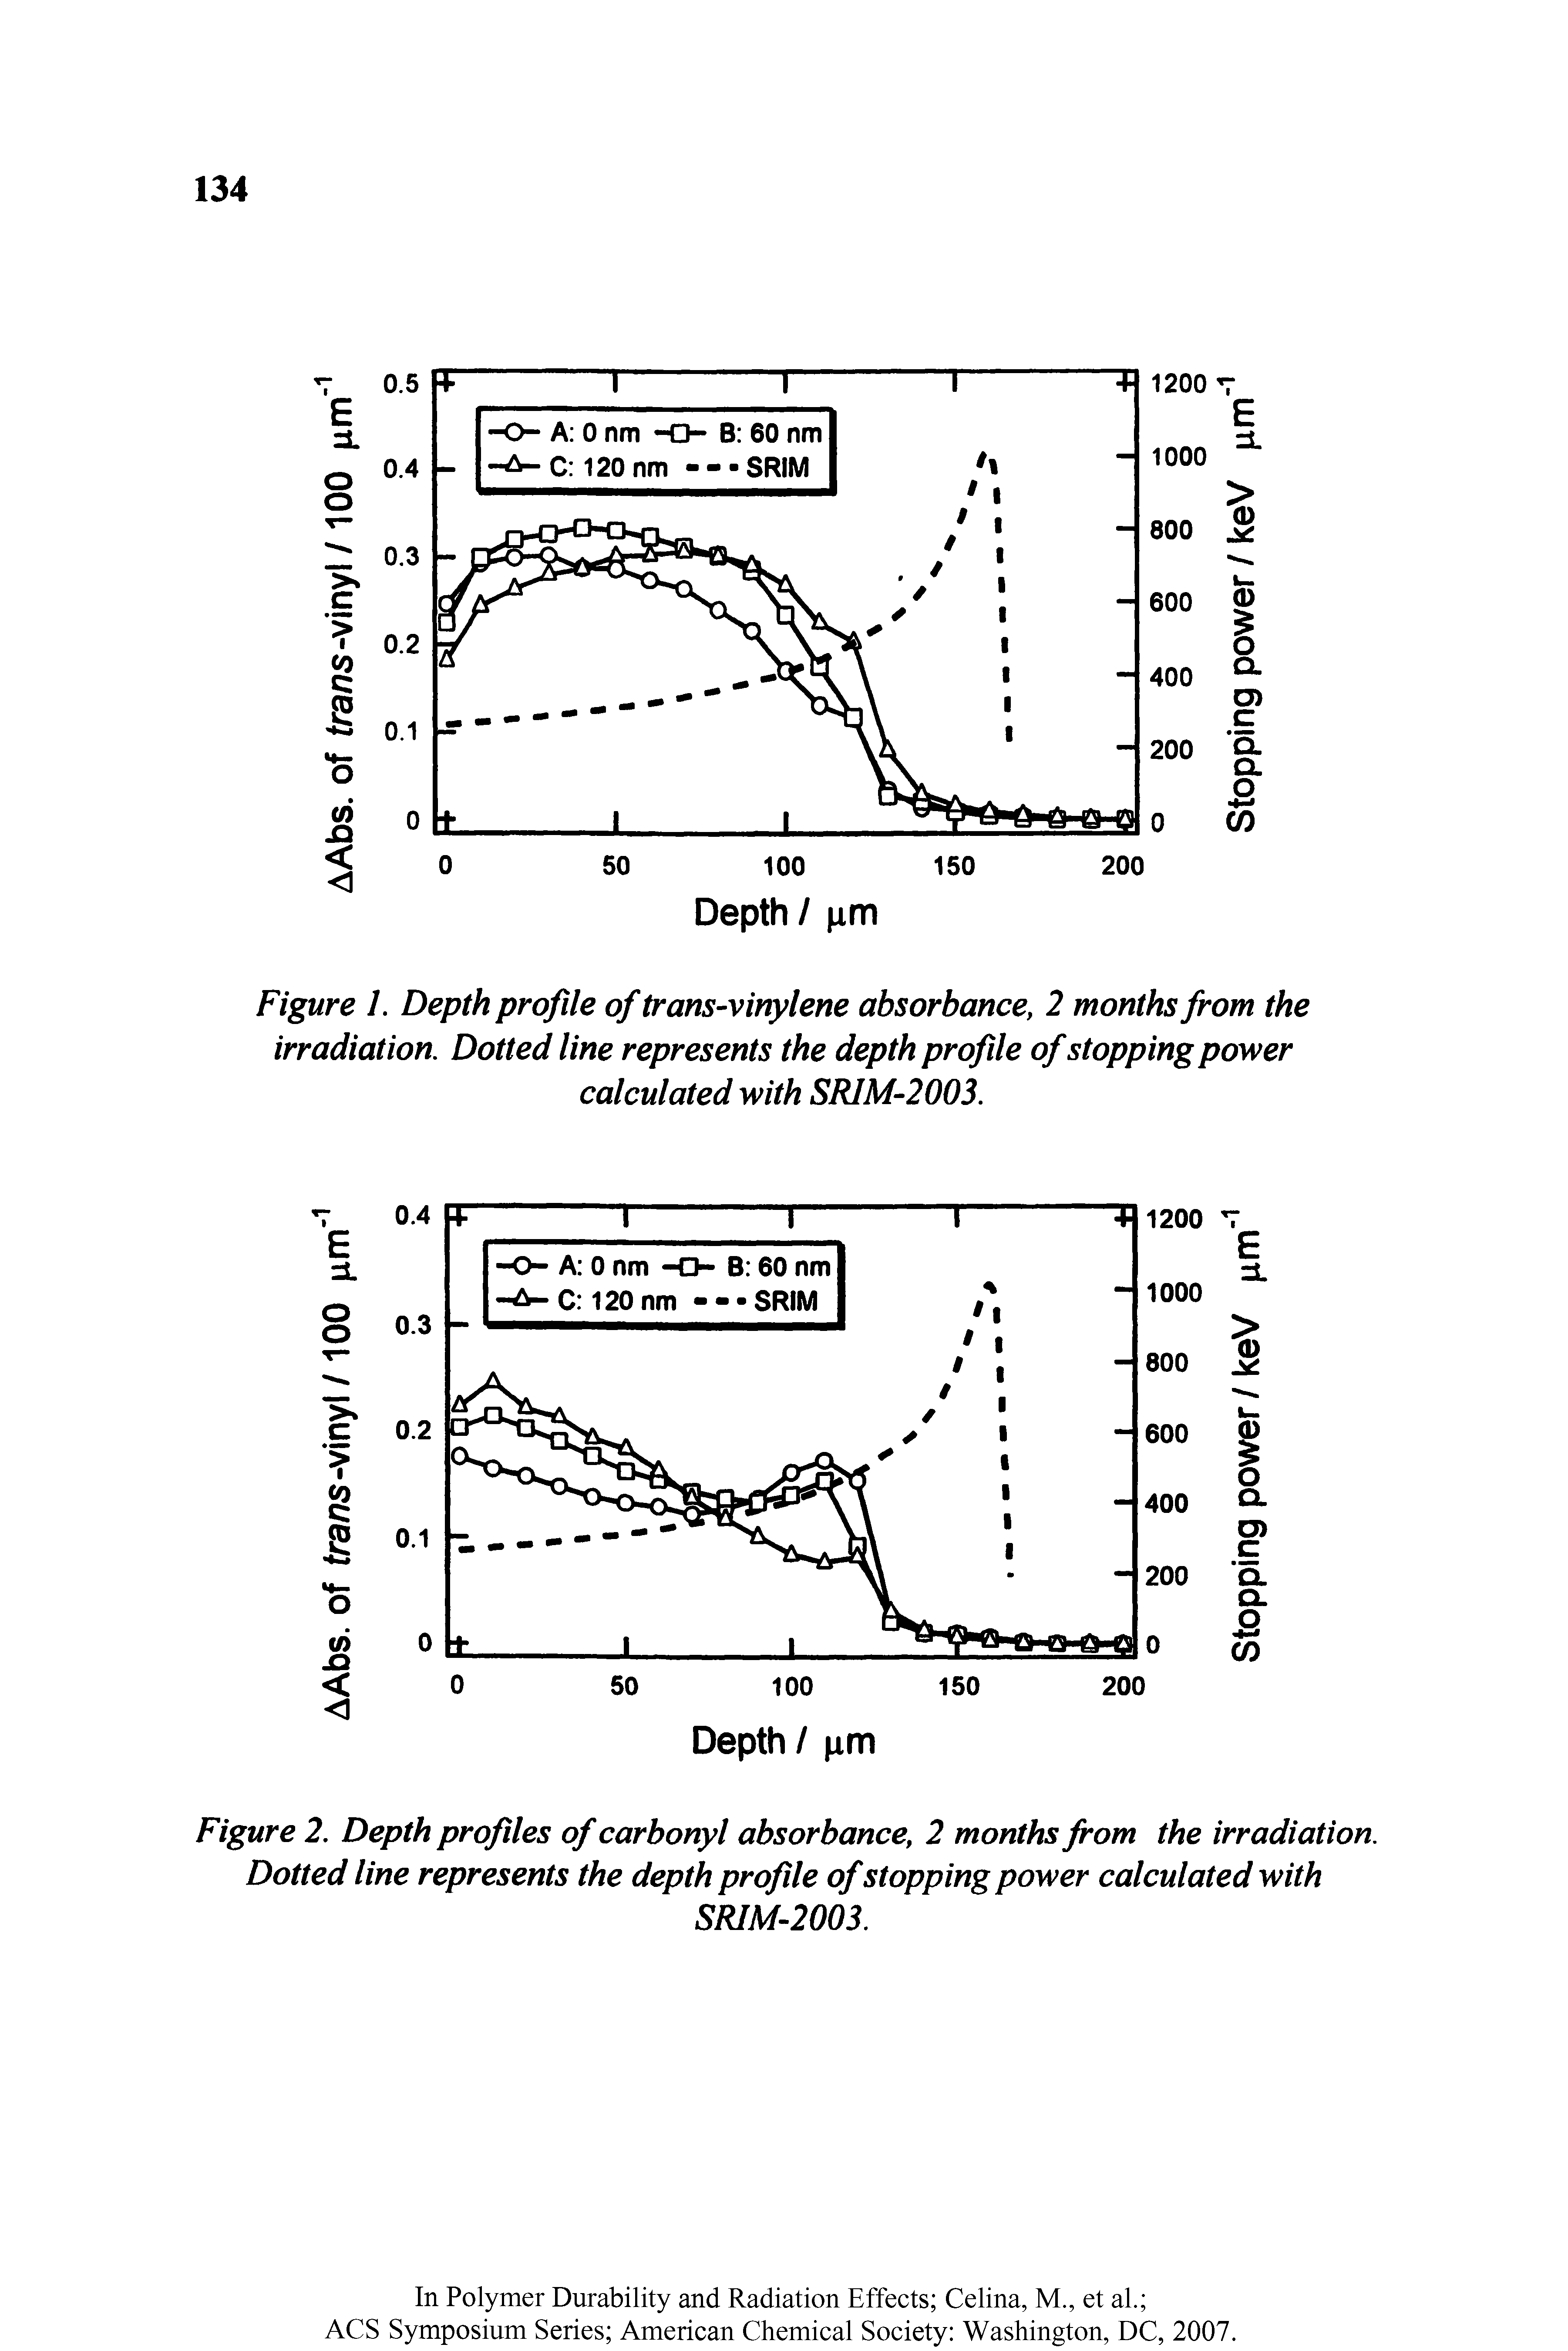 Figure 1. Depth profile of trans-vinylene absorbance, 2 months from the irradiation. Dotted line represents the depth profile of stopping power calculated with SR1M-2003.